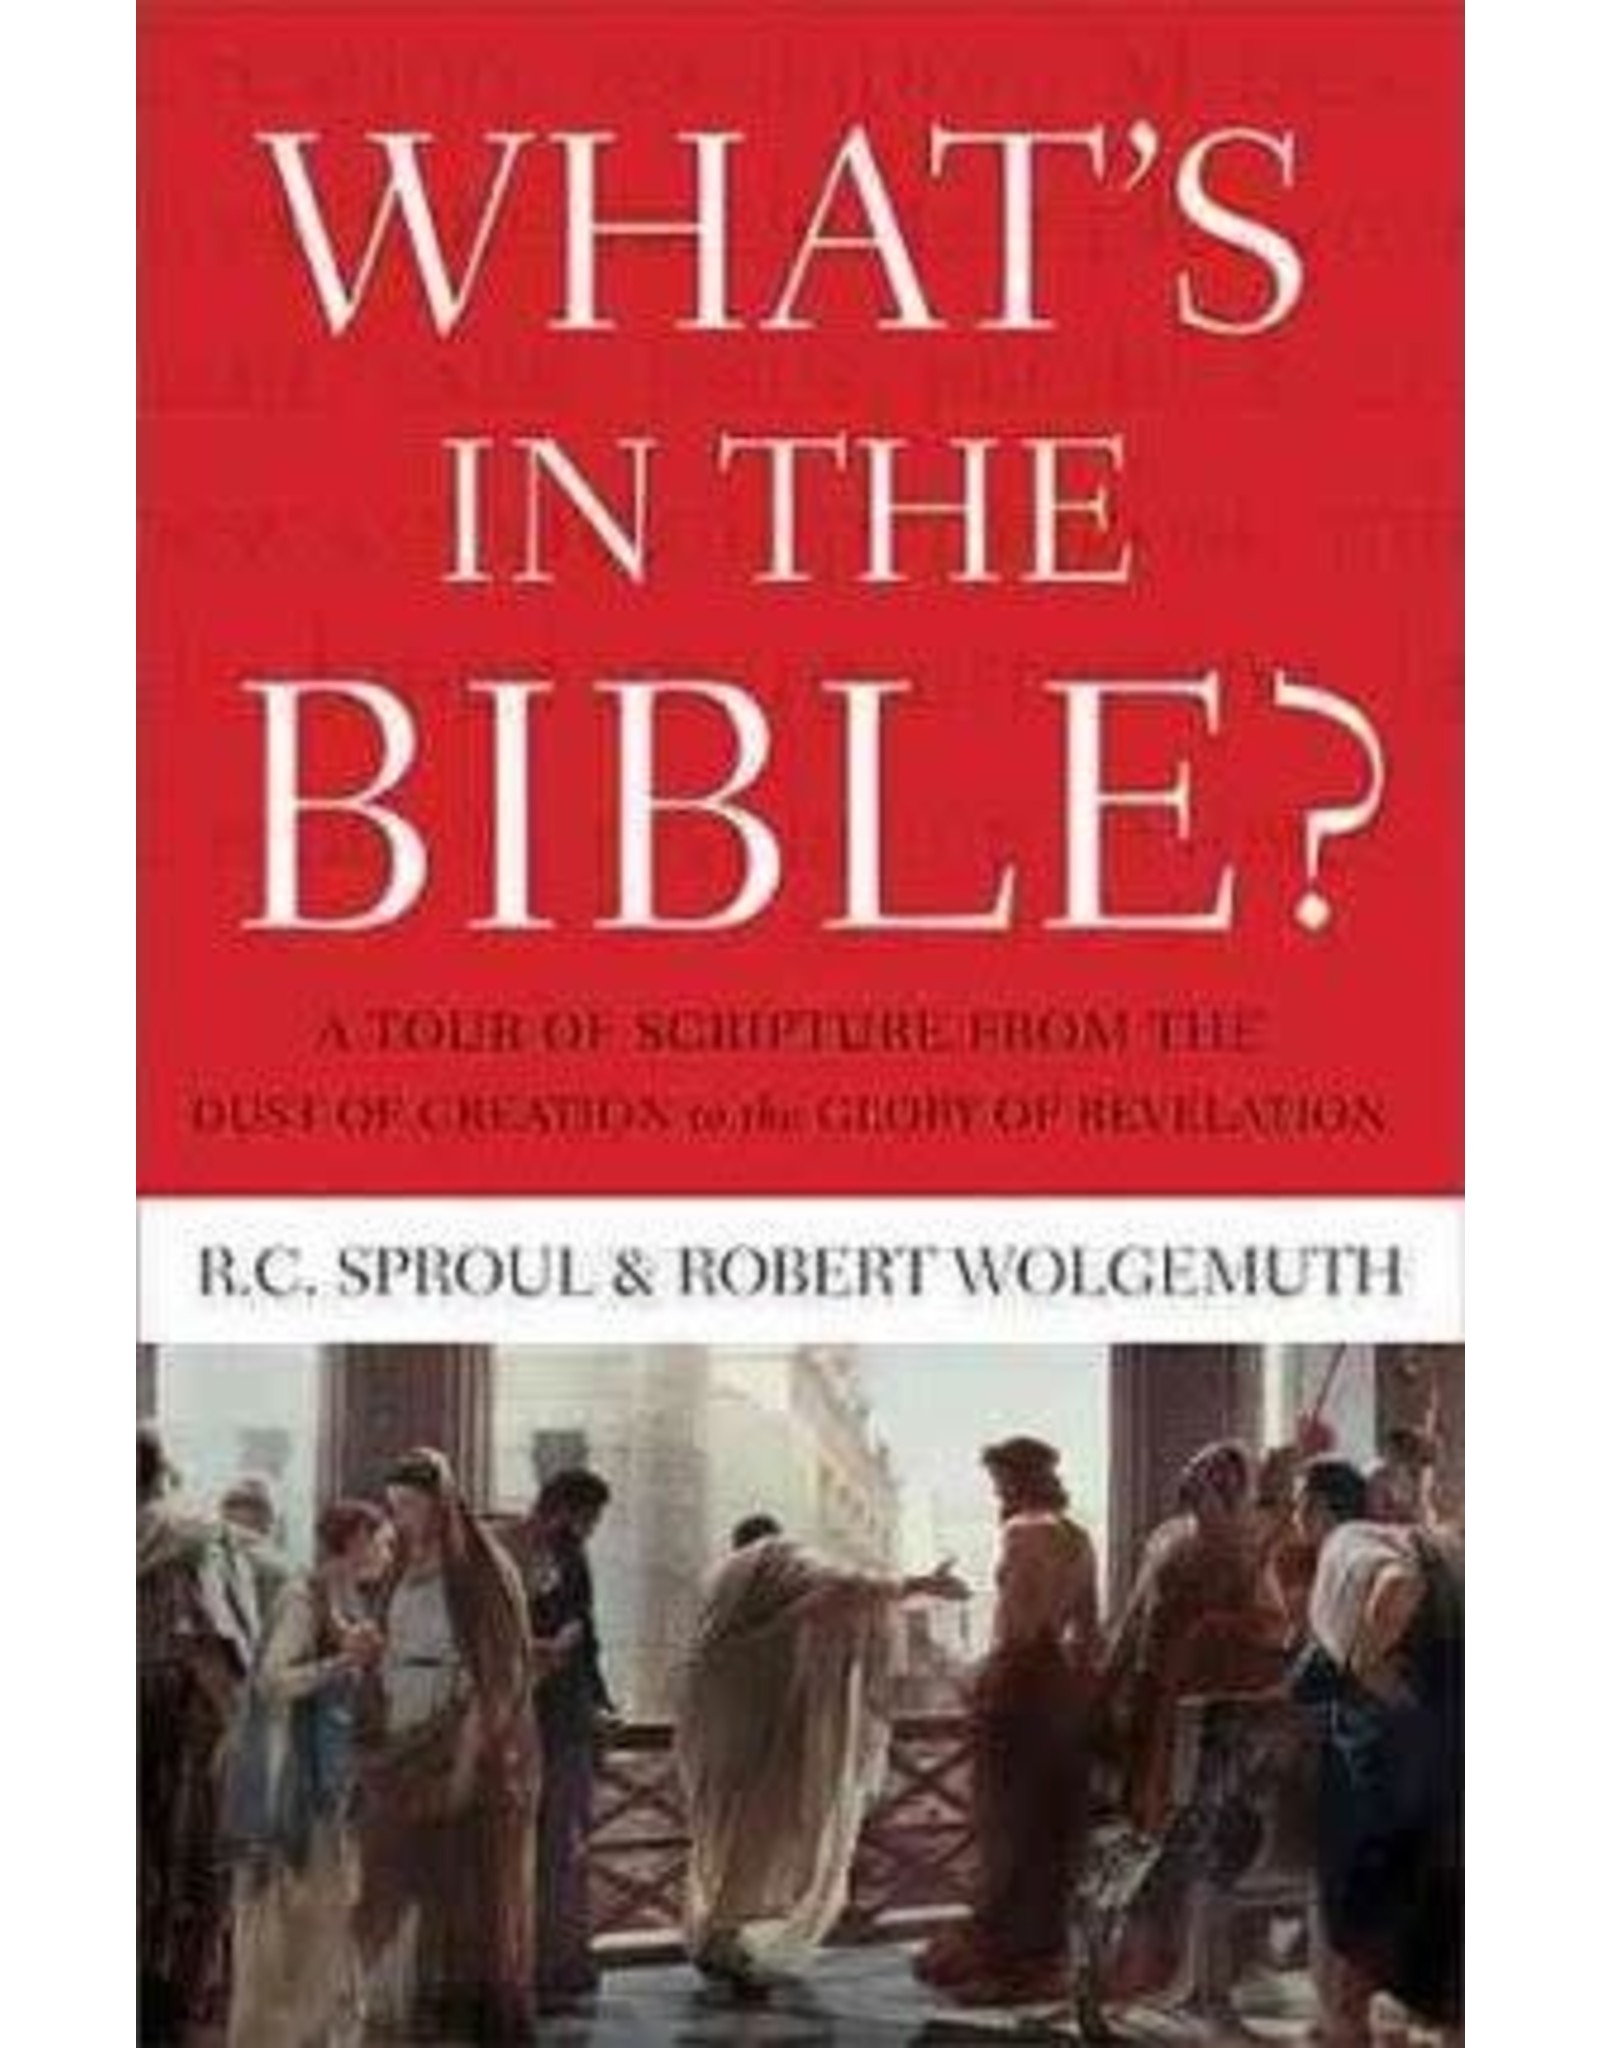 R C Sproul & Robert Wolgemuth What's In the Bible?